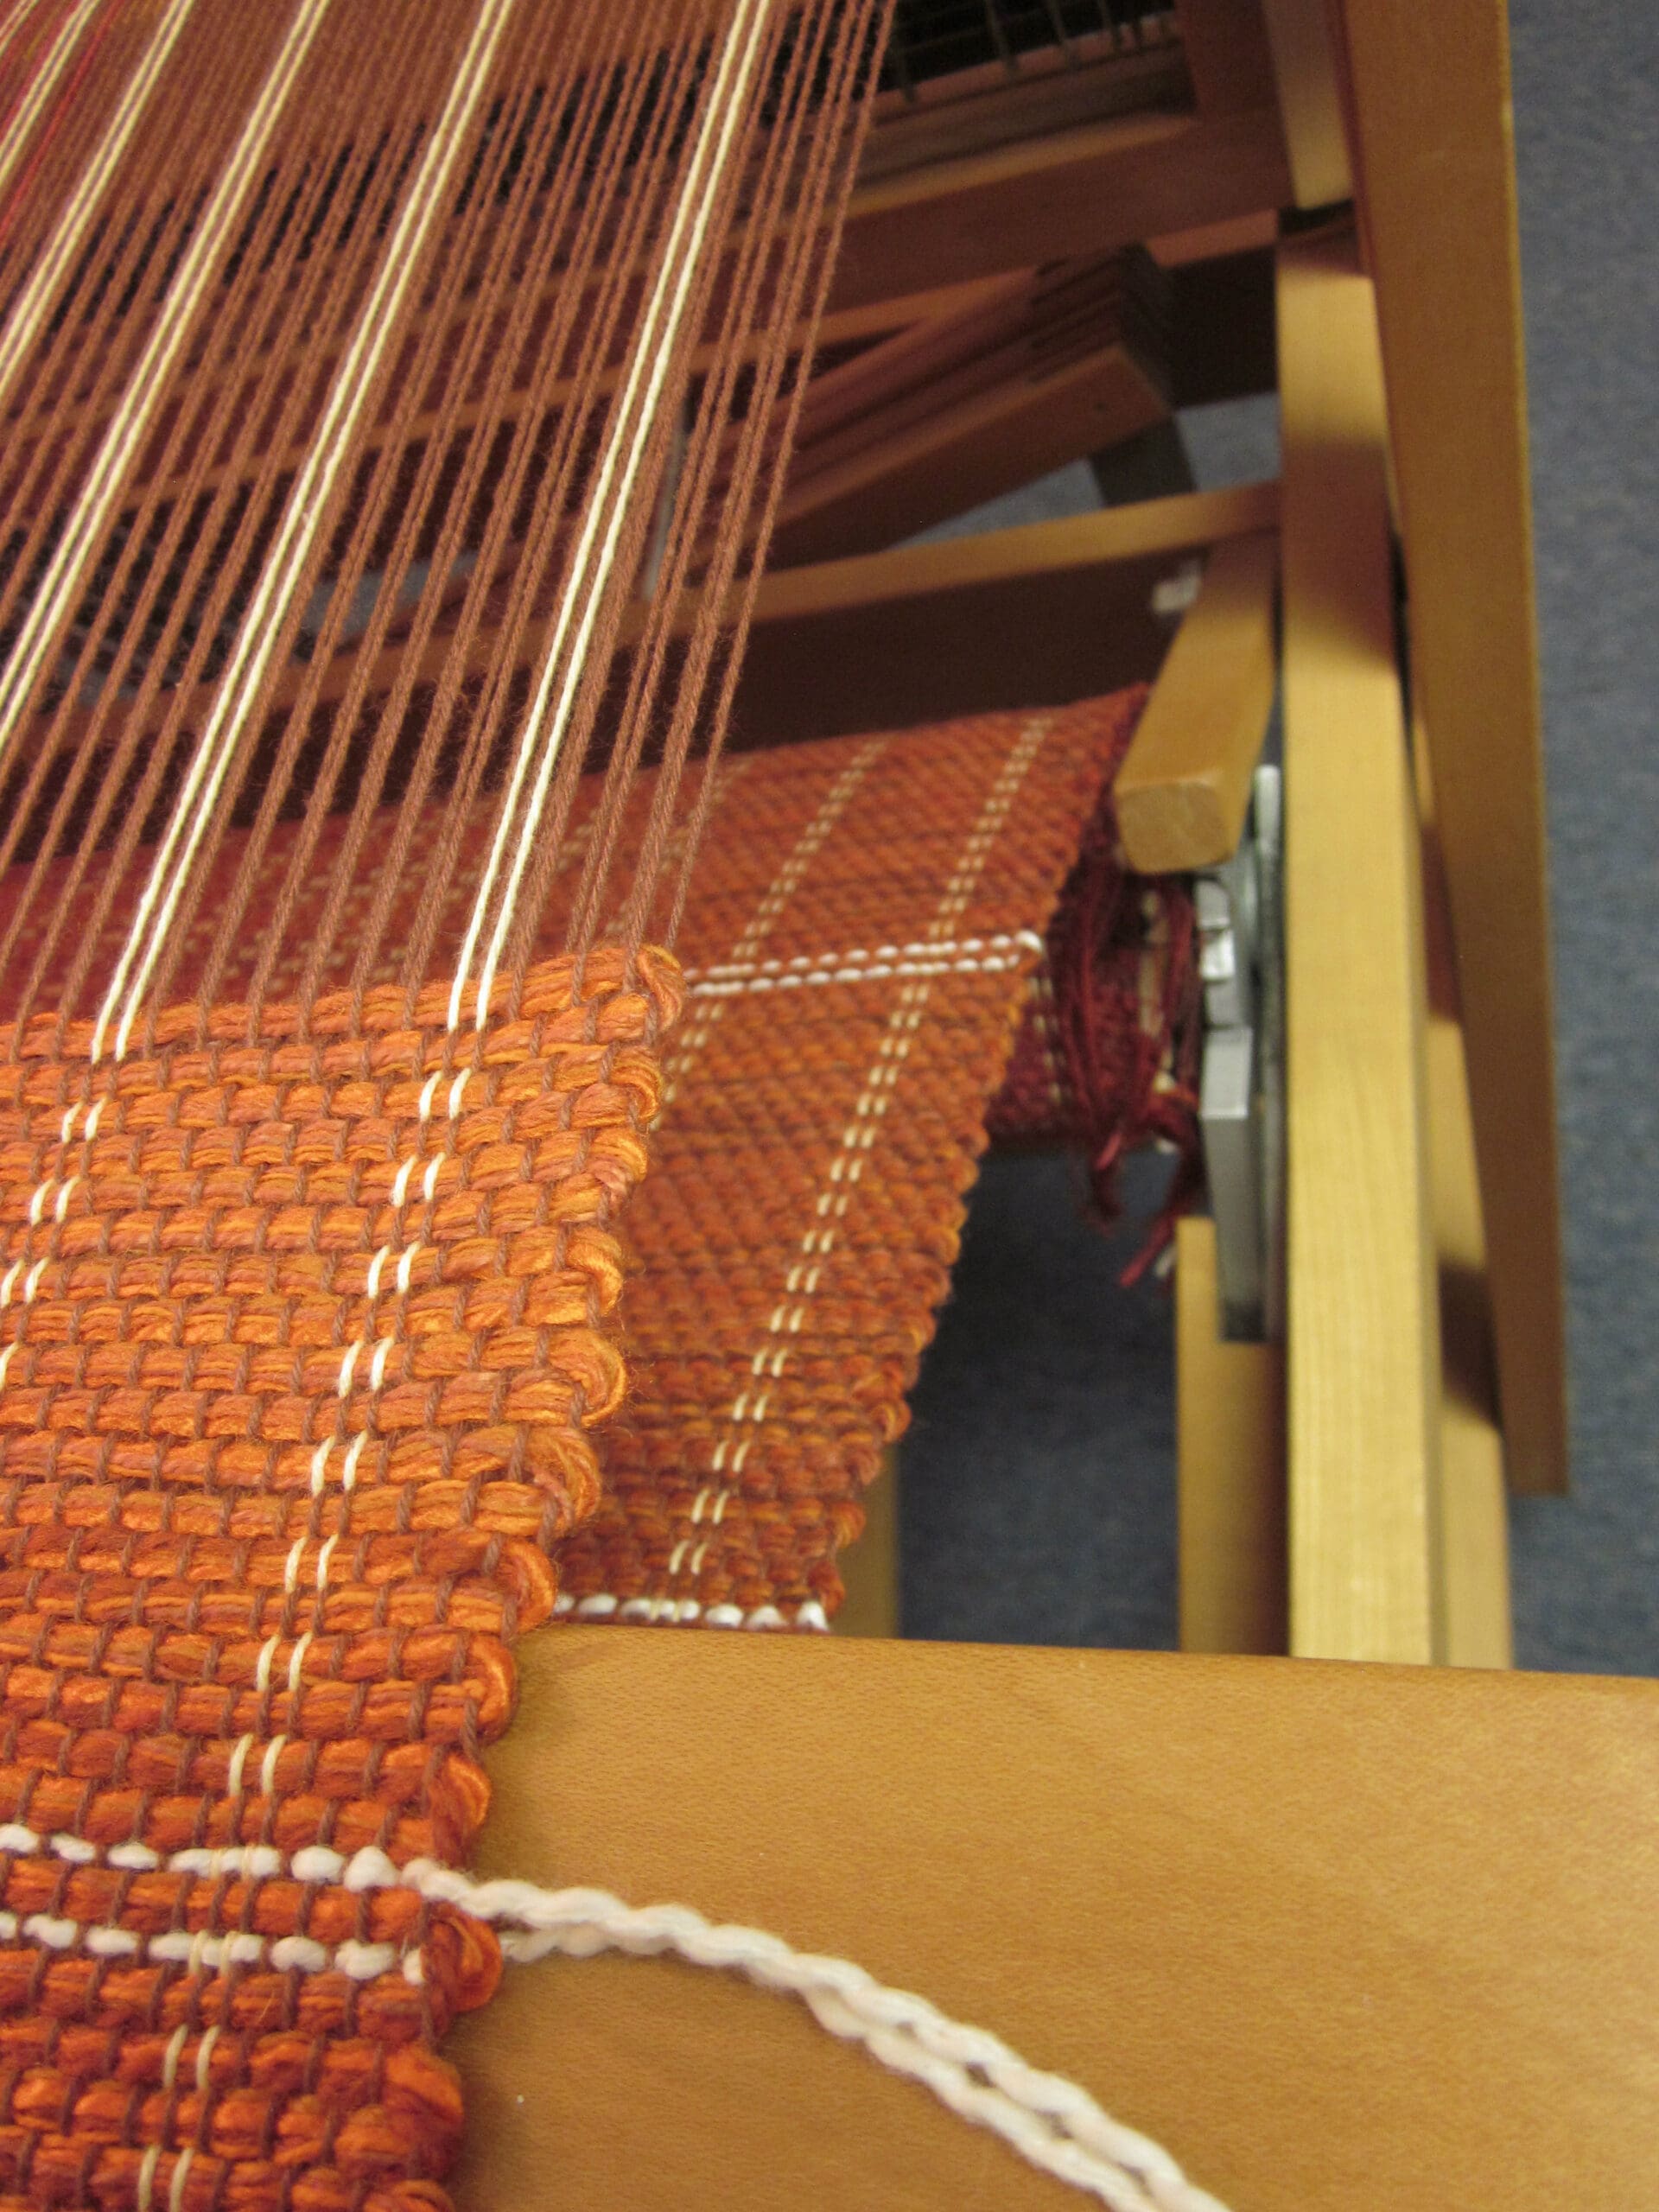 Wrapping around the loom...